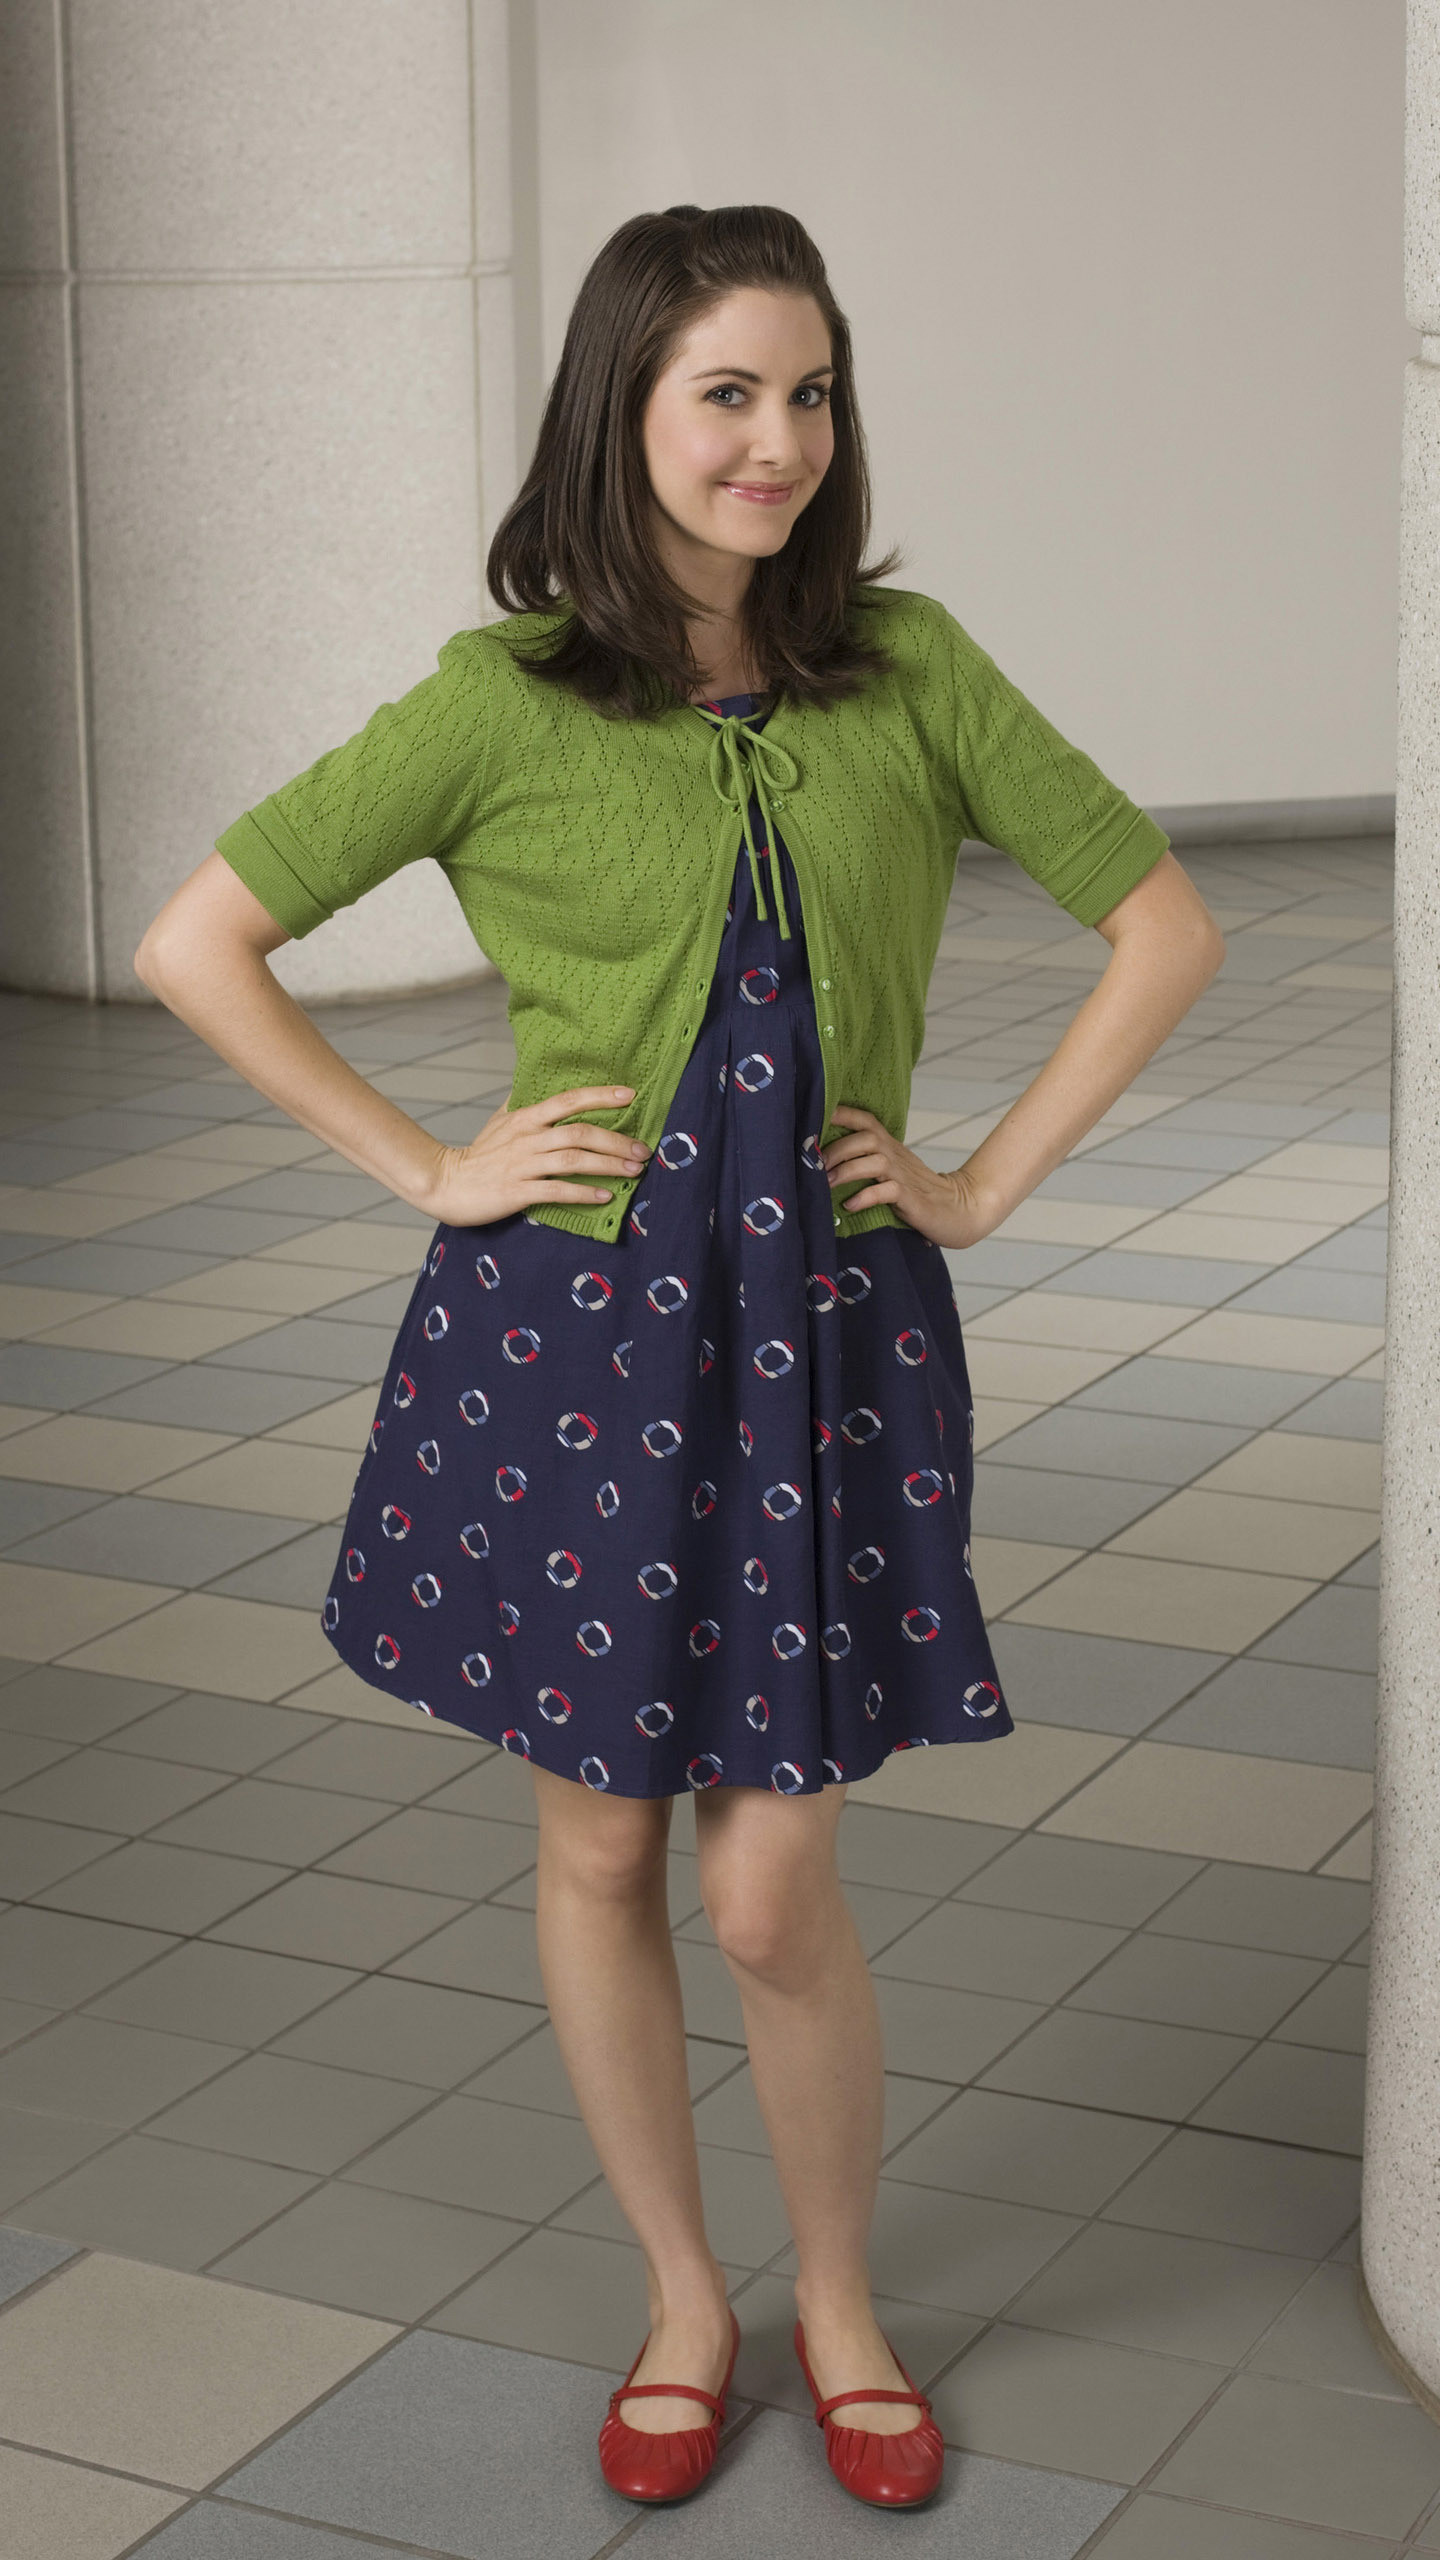 1440x2560 ... Alison Brie as Annie in Community TV Show mobile wallpaper